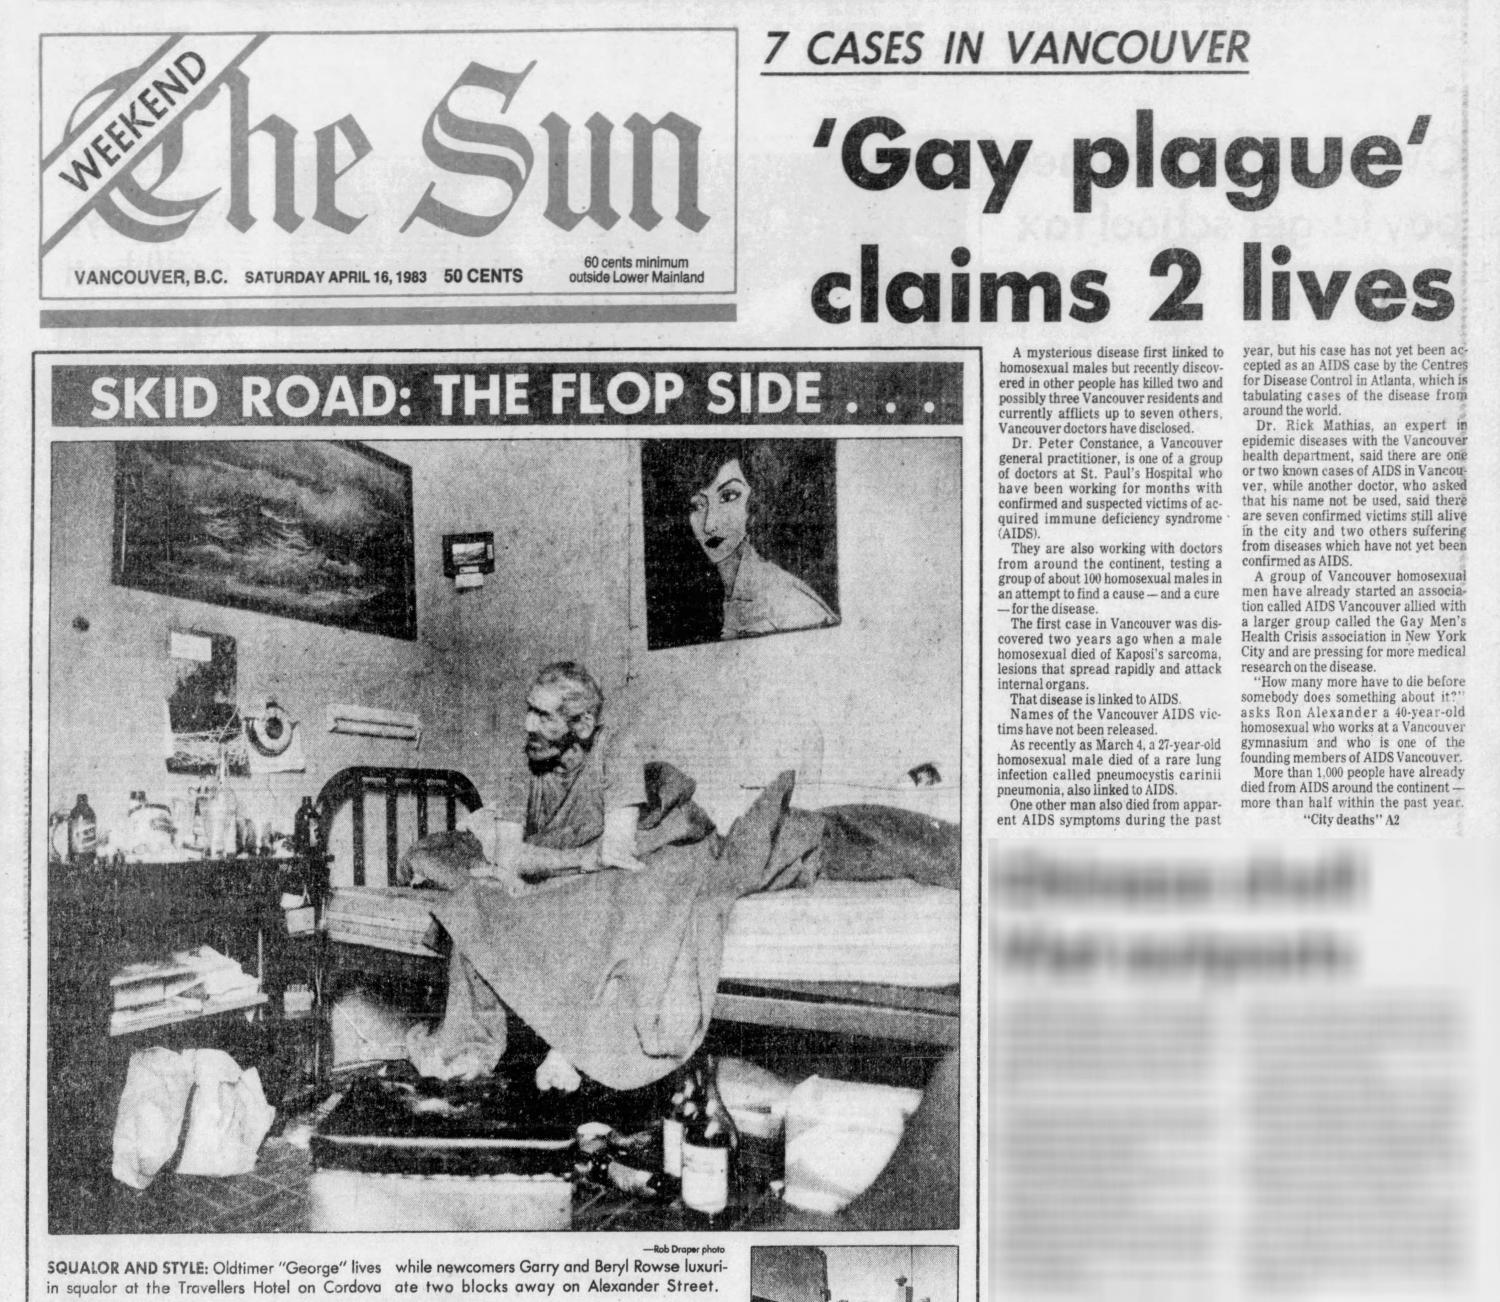 Article with headline “‘Gay plague’ claims 2 lives”